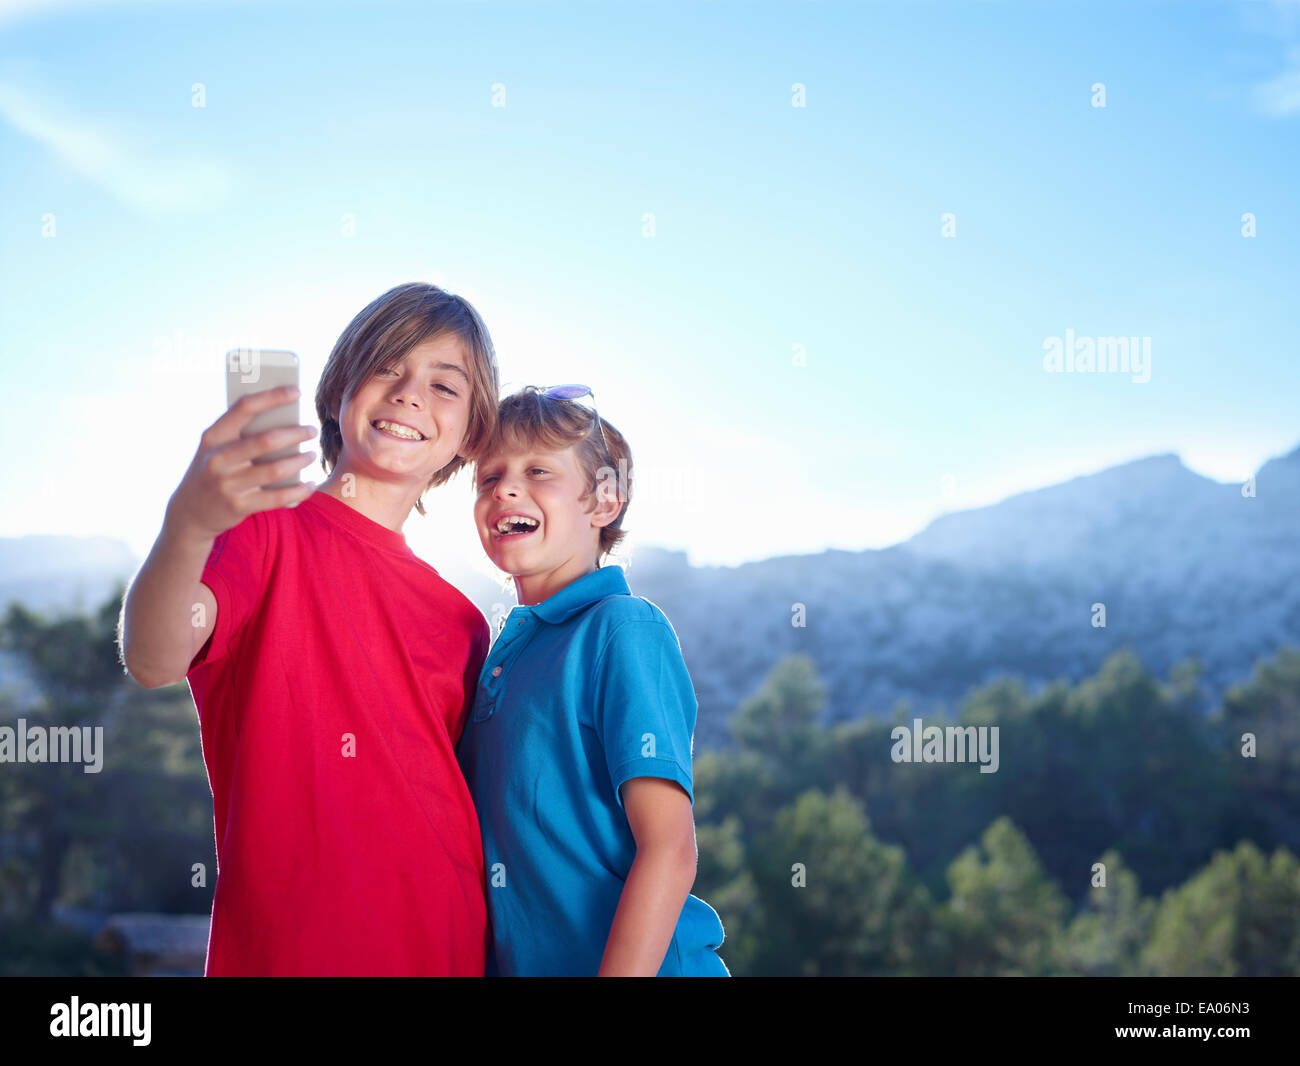 Two brothers taking selfie on smartphone, Majorca, Spain Stock Photo